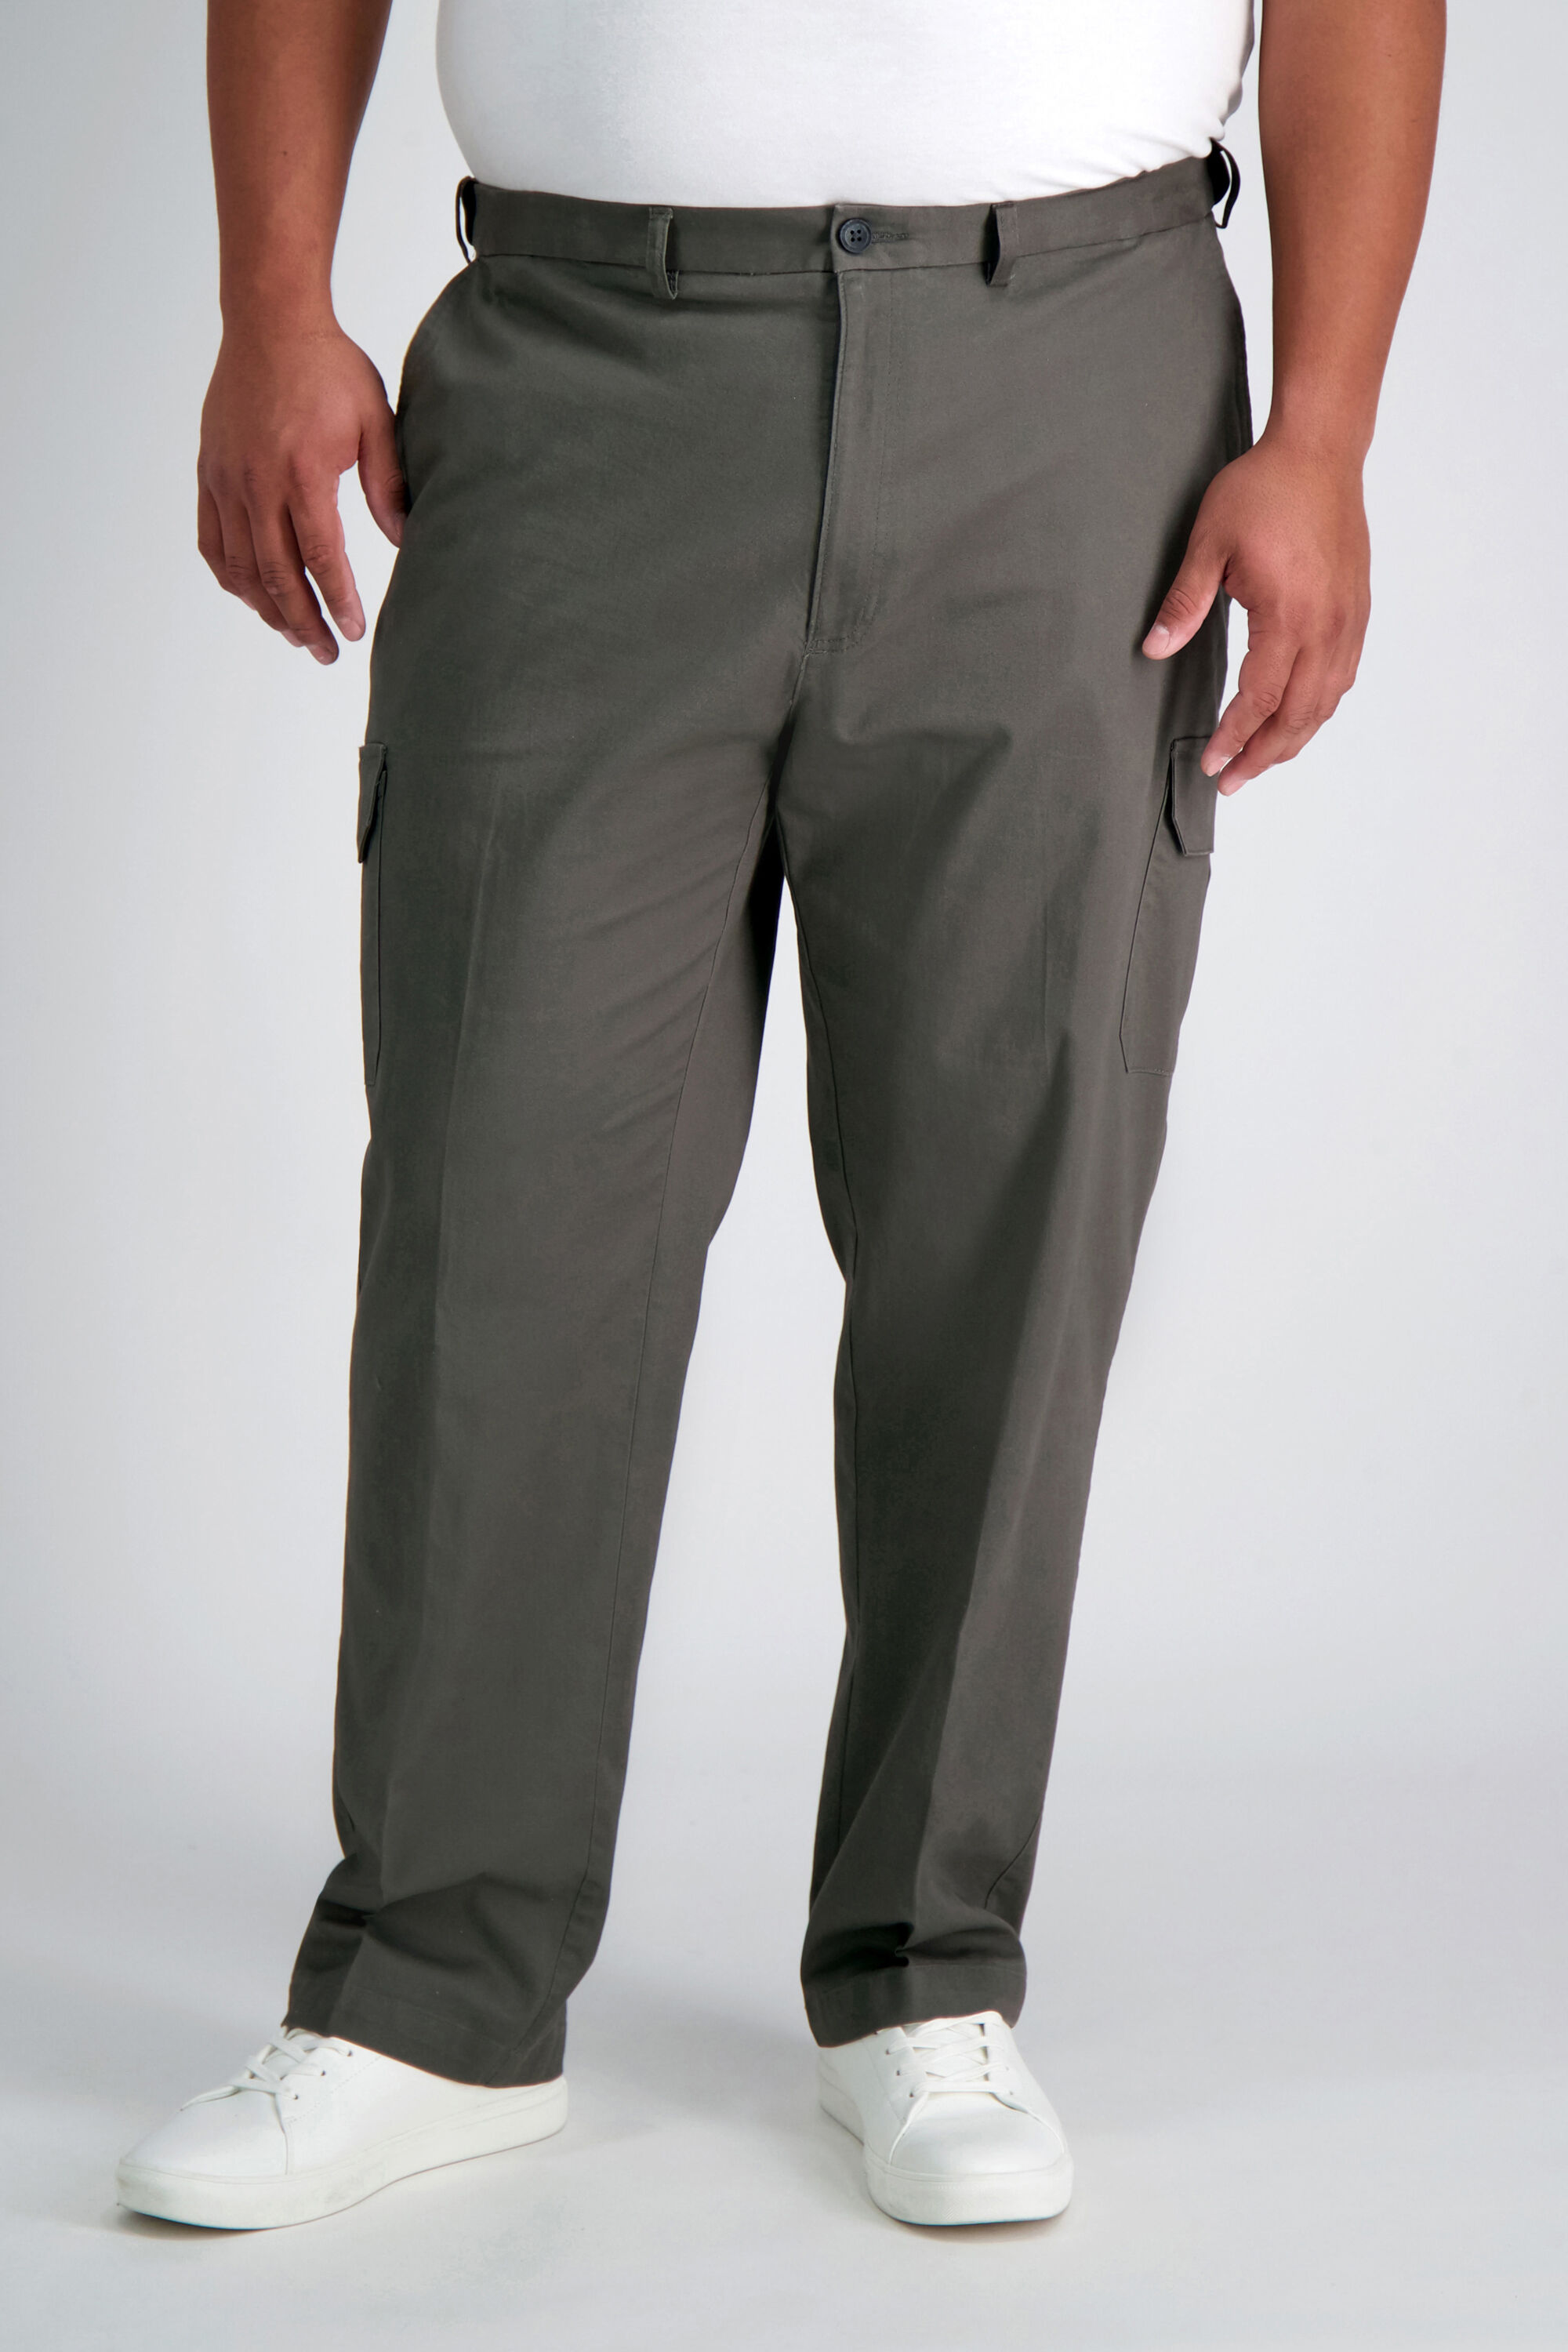 big and tall white cargo pants